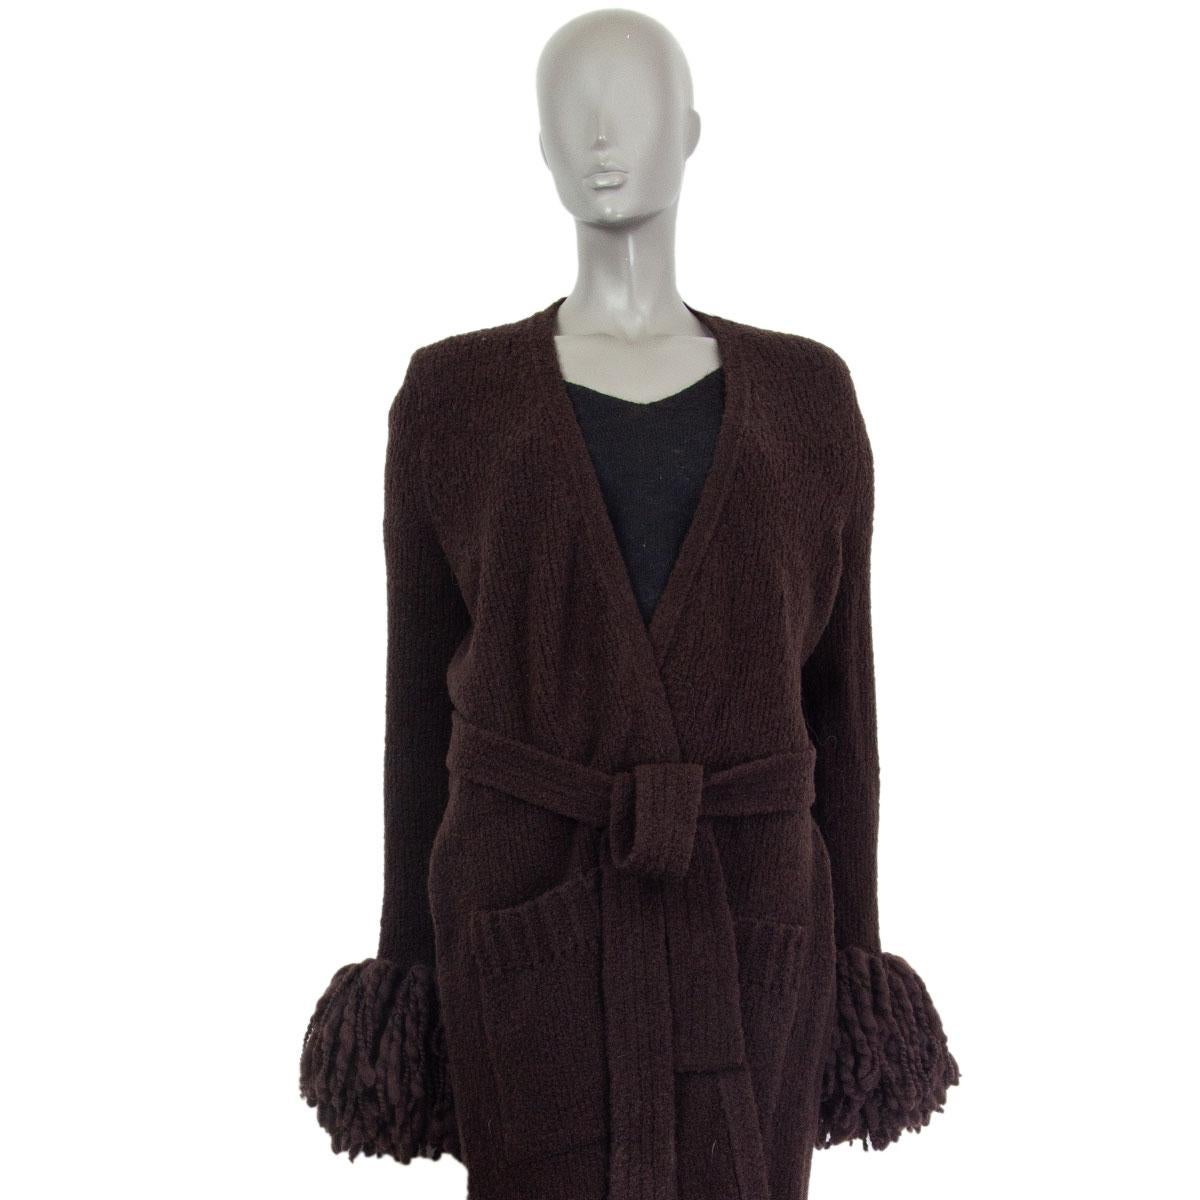 Bottega Veneta belted long cardigan. It is designed to complete the season’s luxe loungewear sensibility. Made of espresso brown soft wool (88%) and polyamide (12%) with fringed mohair trim at the cuffs, the soft knit works beautifully with an